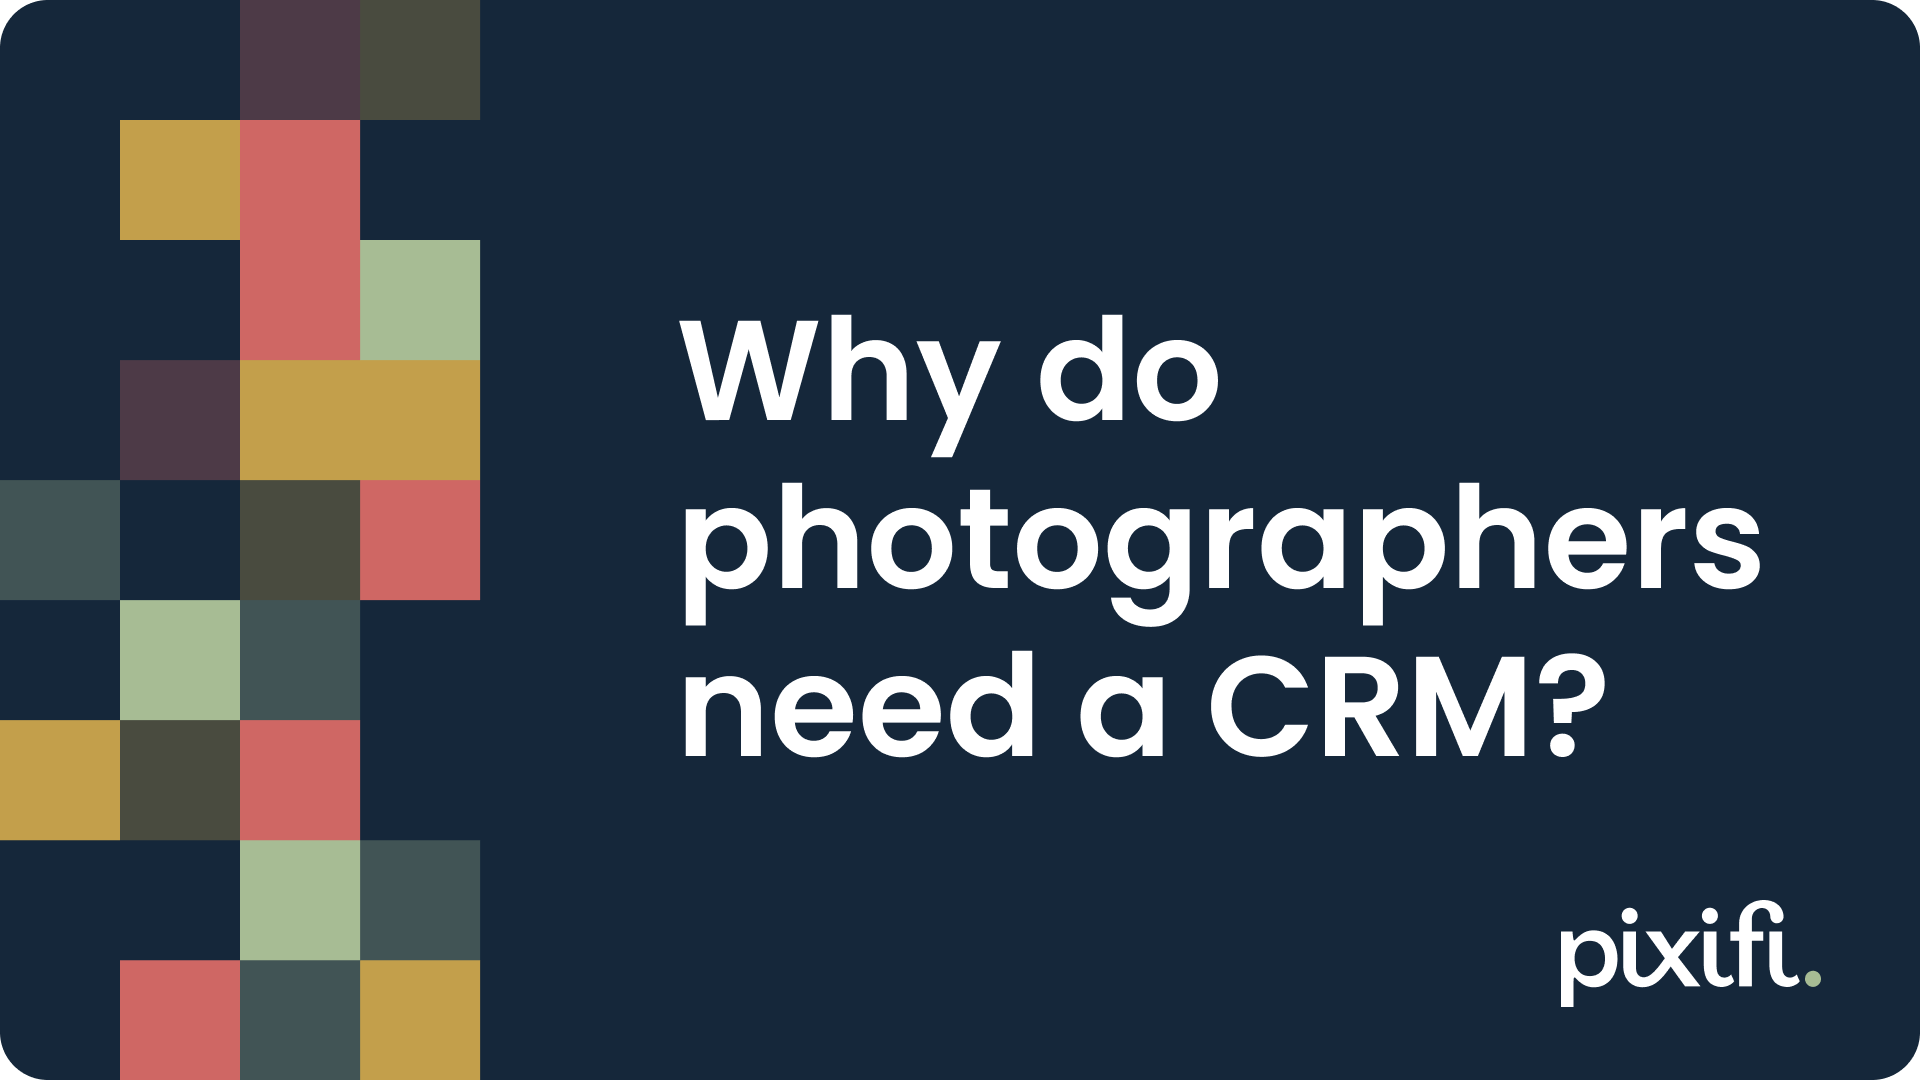 Why do photographers need a CRM?